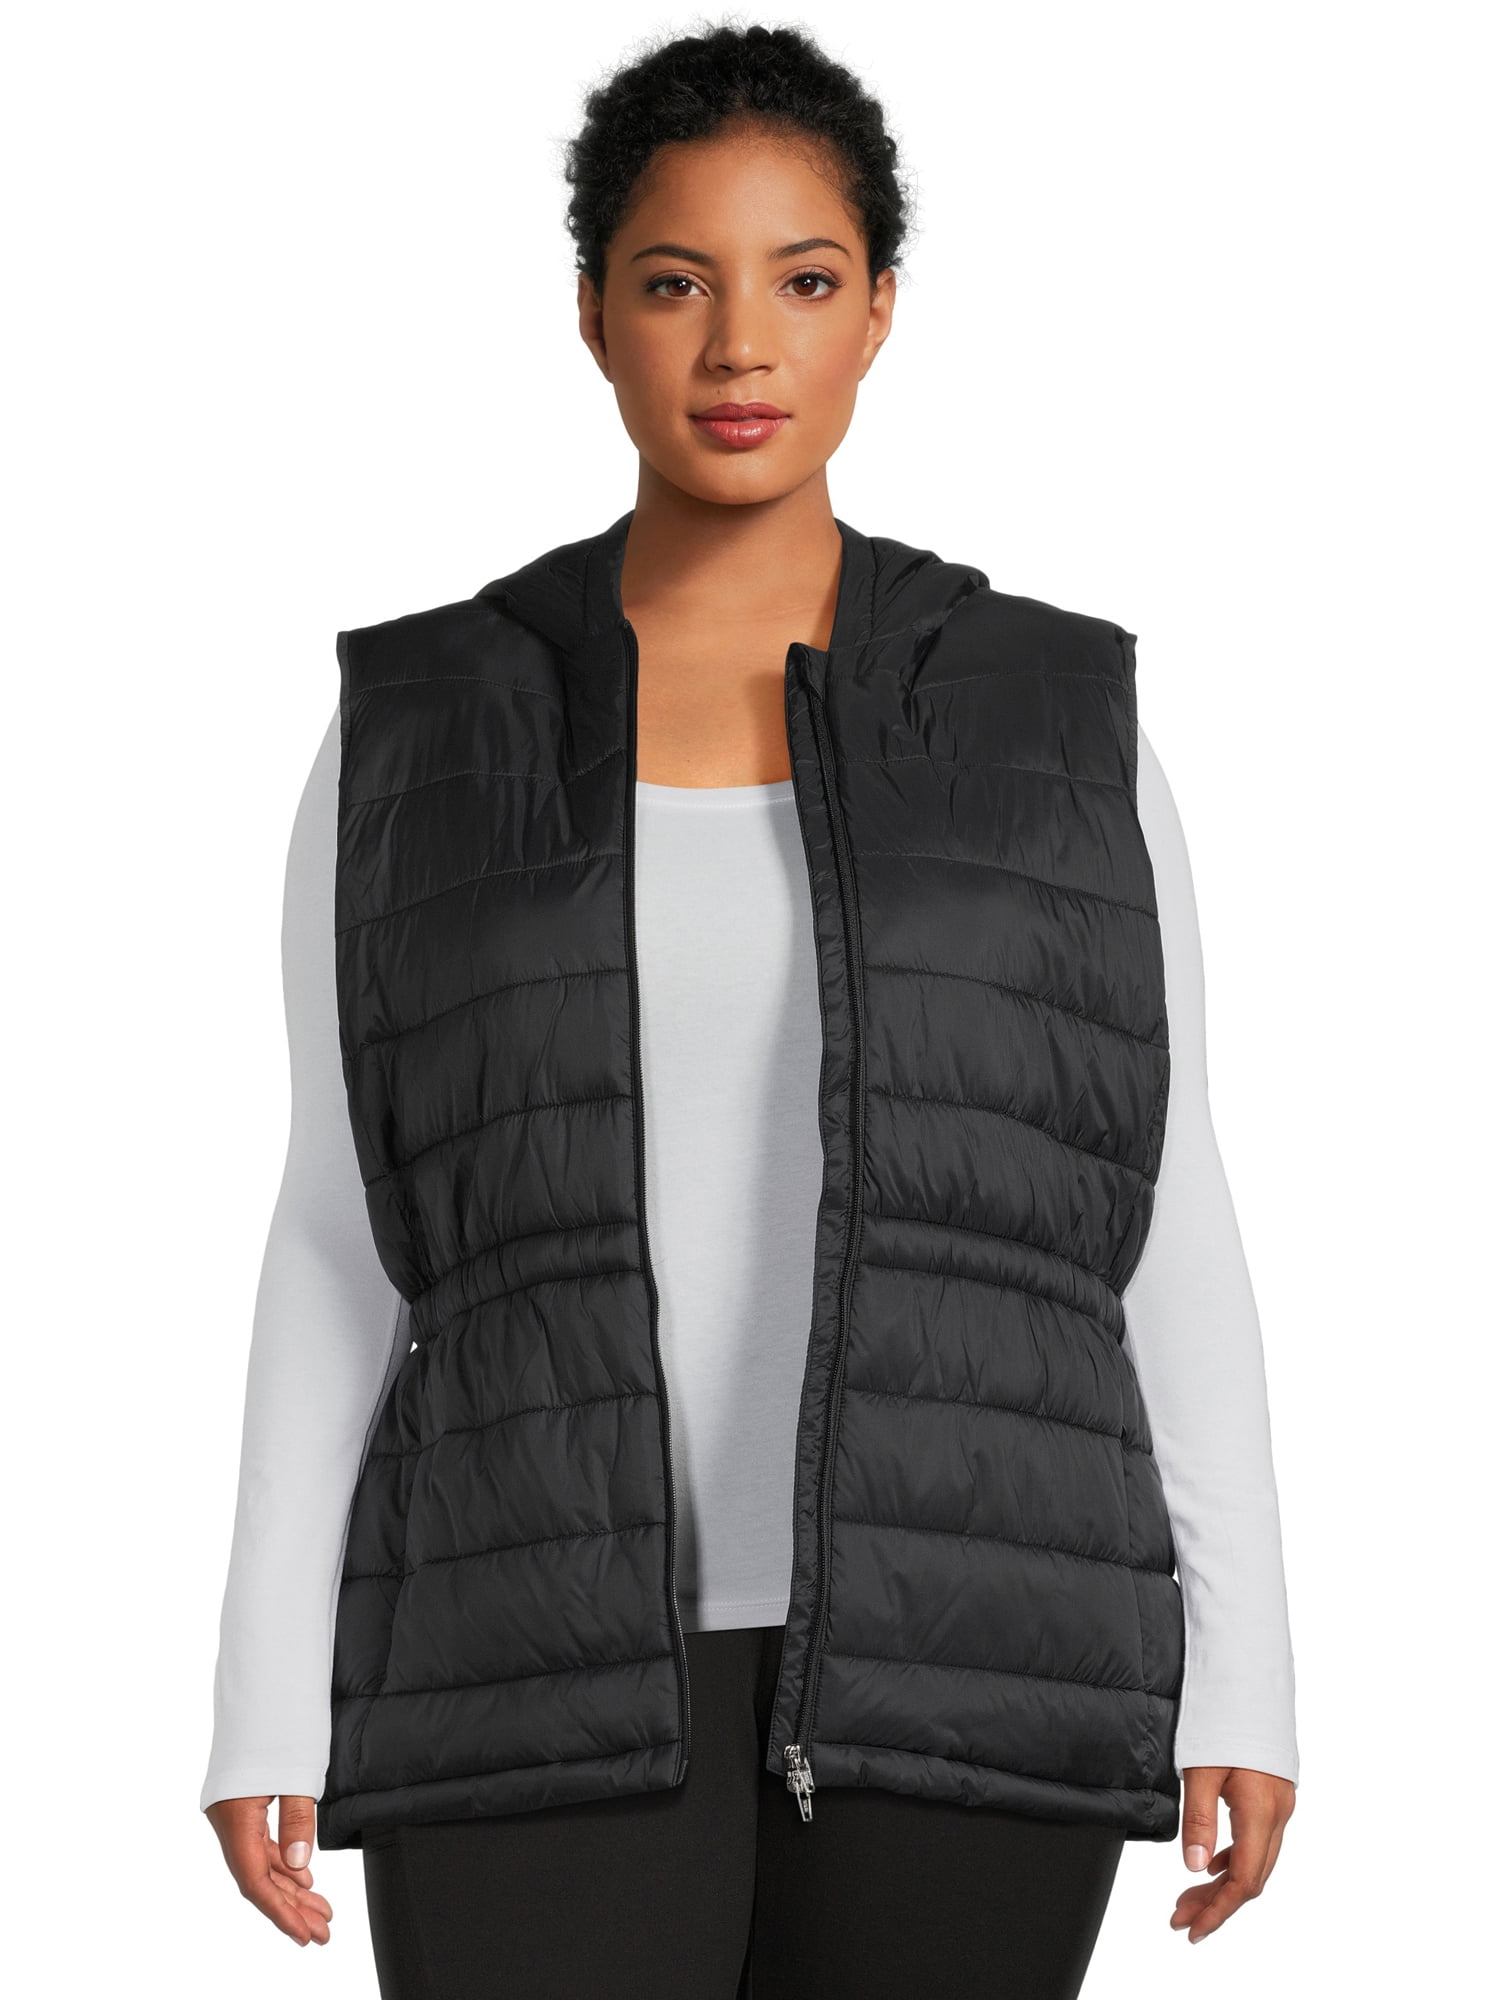 Swiss Tech Women's Hooded Vest with Cinched Waist, Sizes XS-3X ...